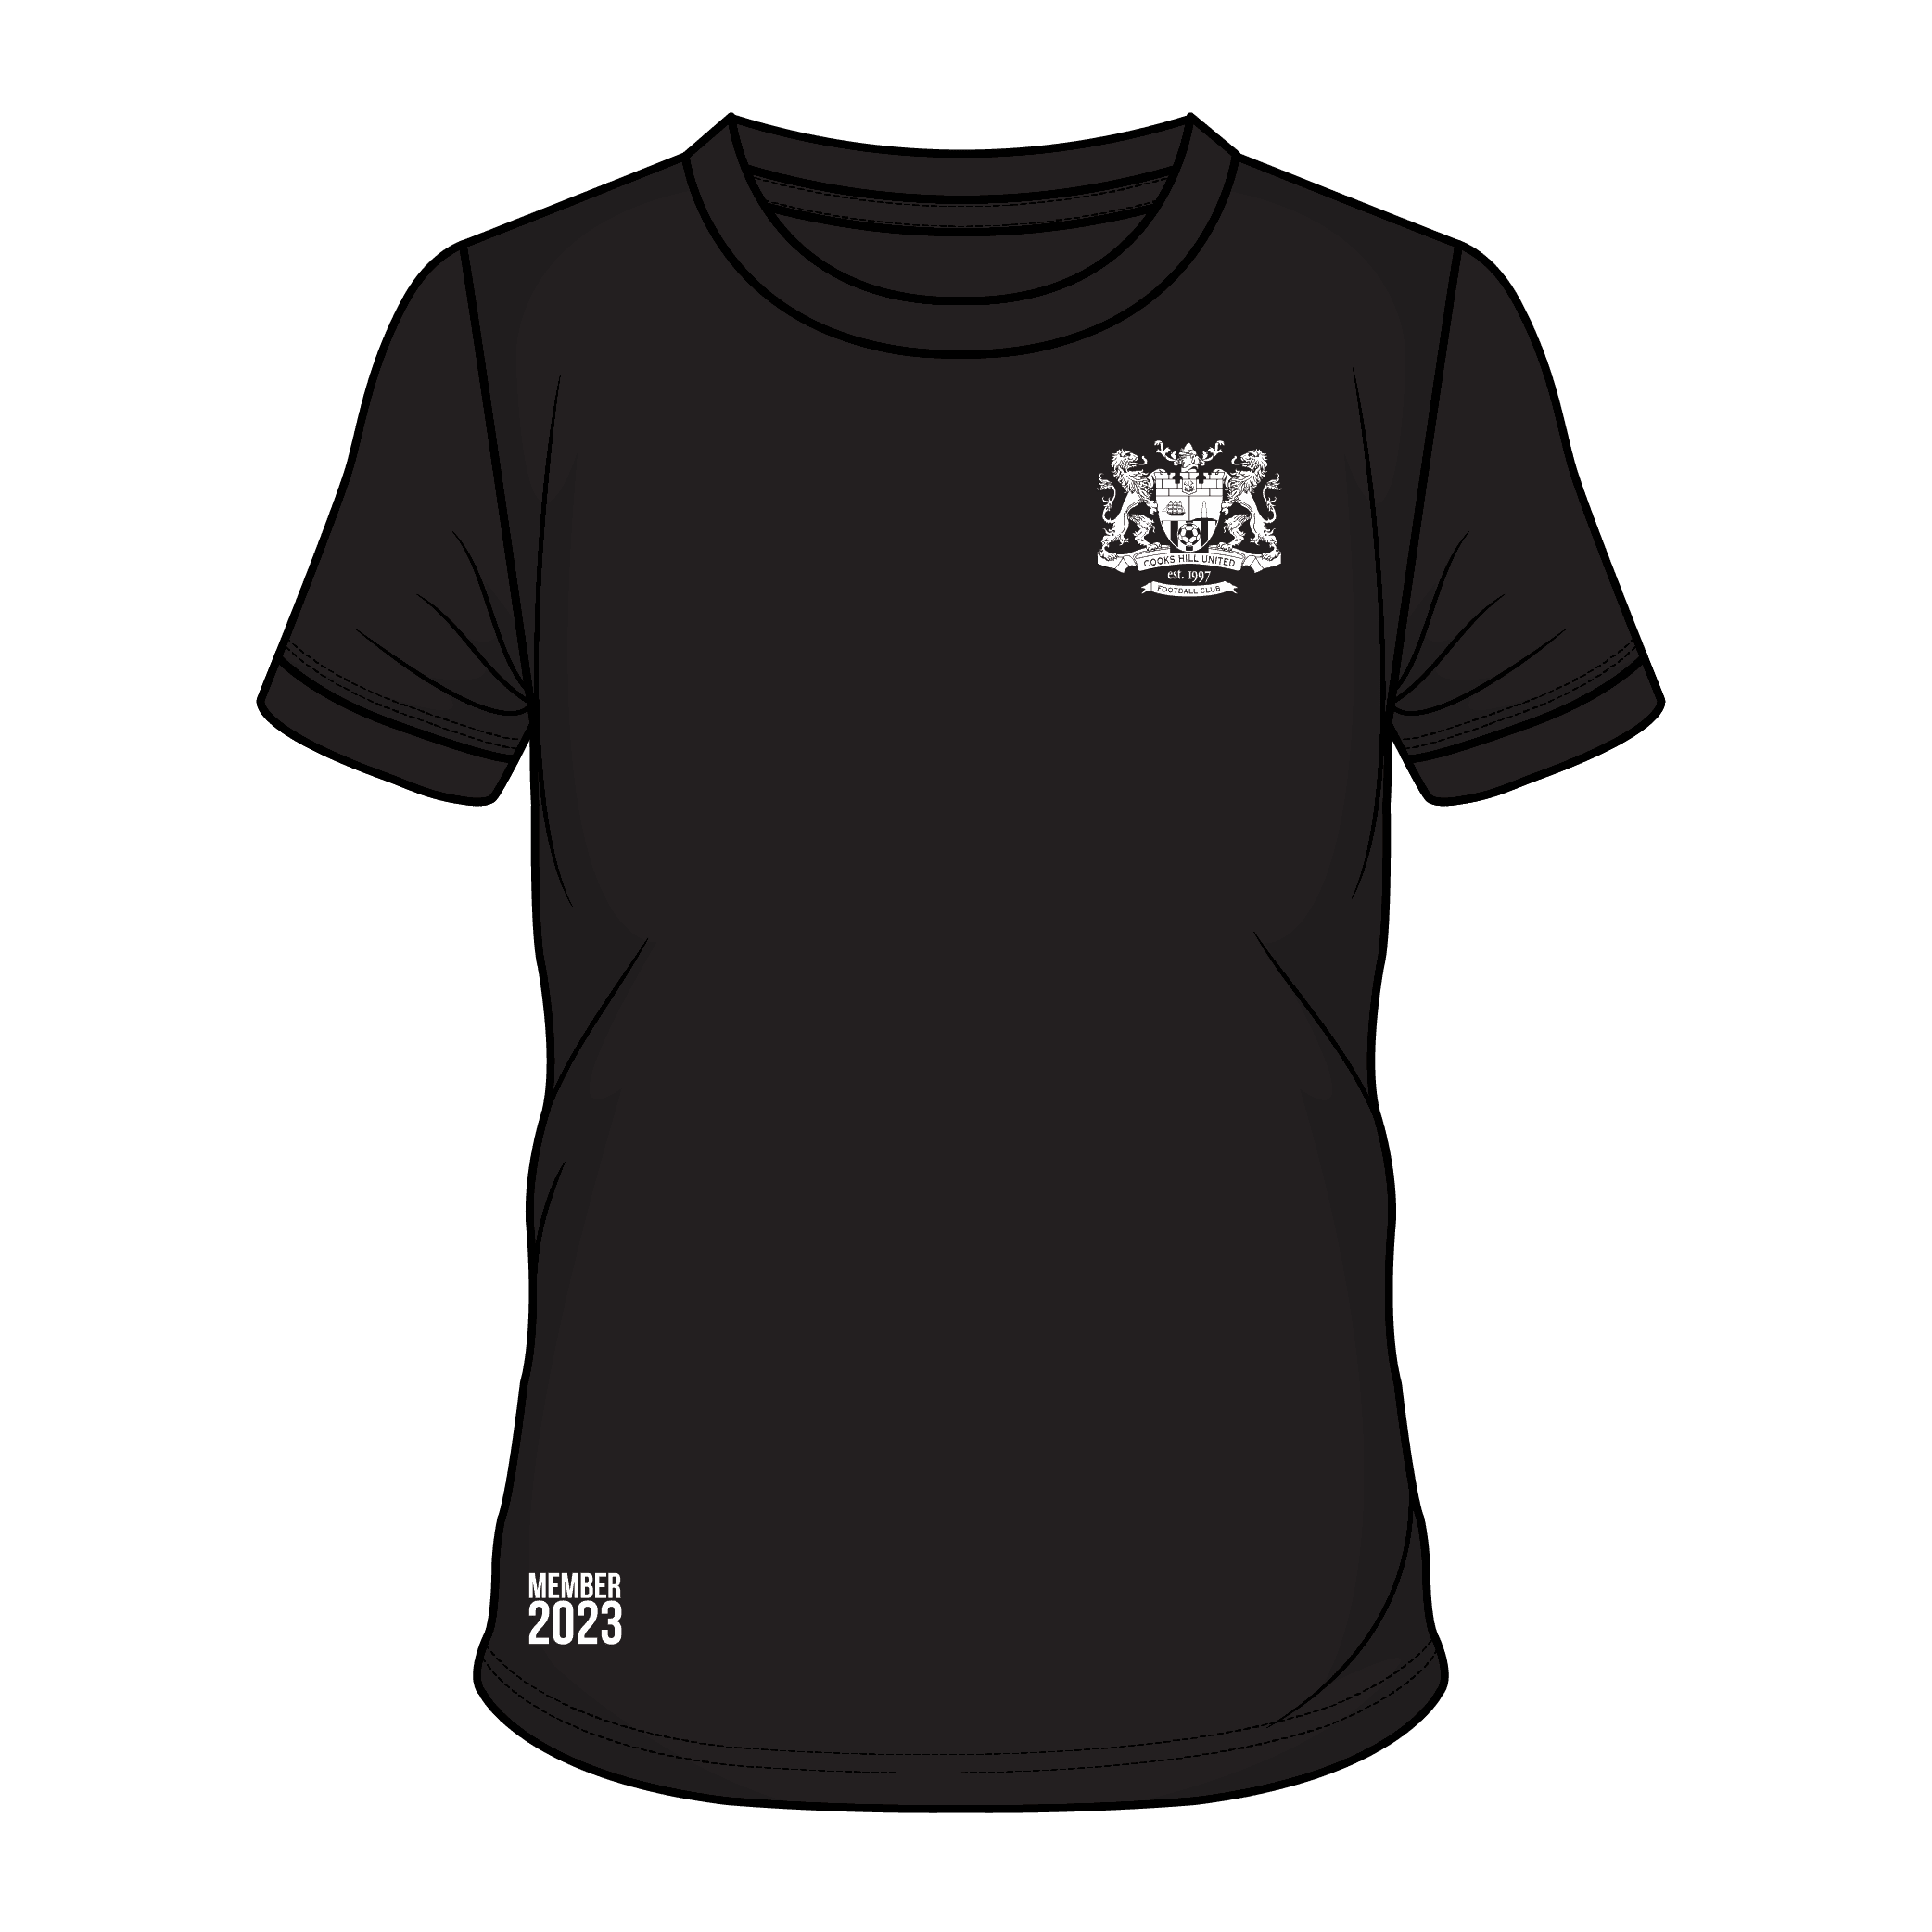 COOKS HILL UNITED FC MERCH TEE WEB IMAGES 01